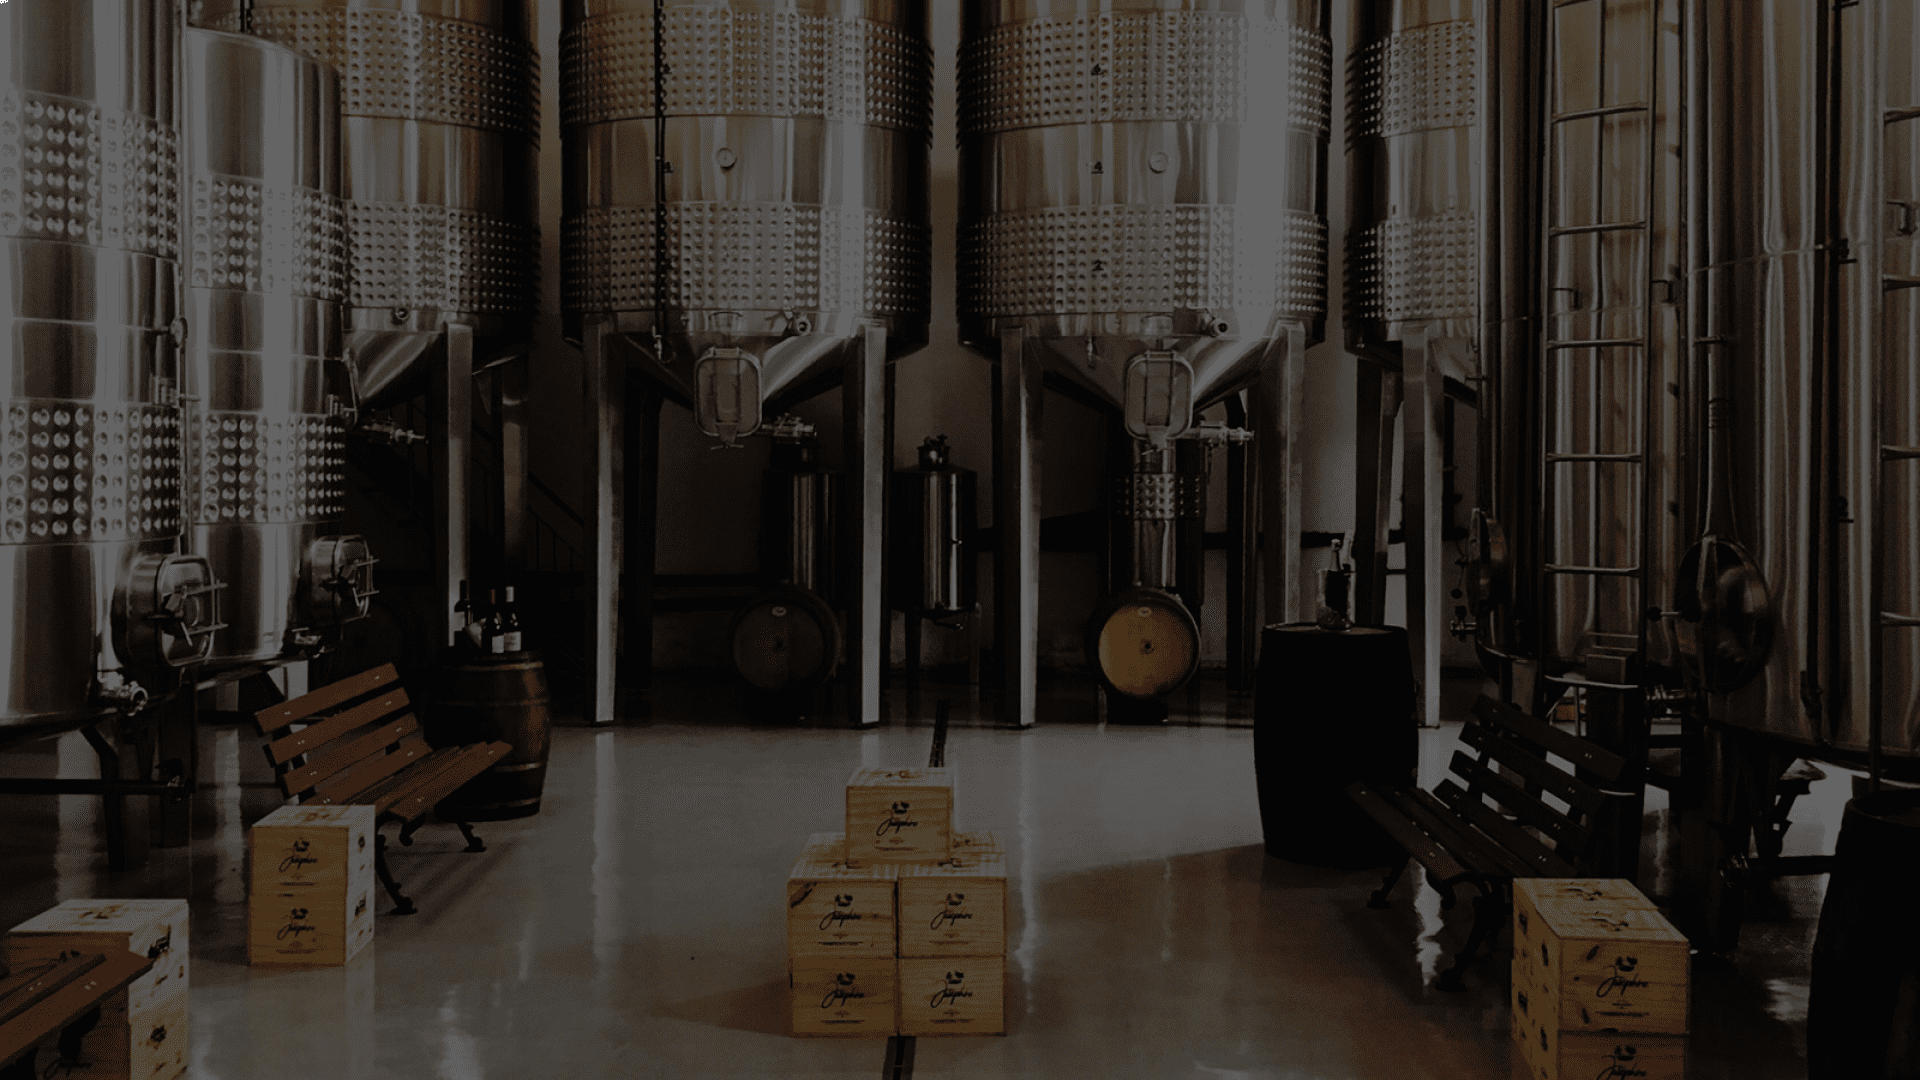 A warehouse filled with brewery tanks and crate boxes stacked in the center